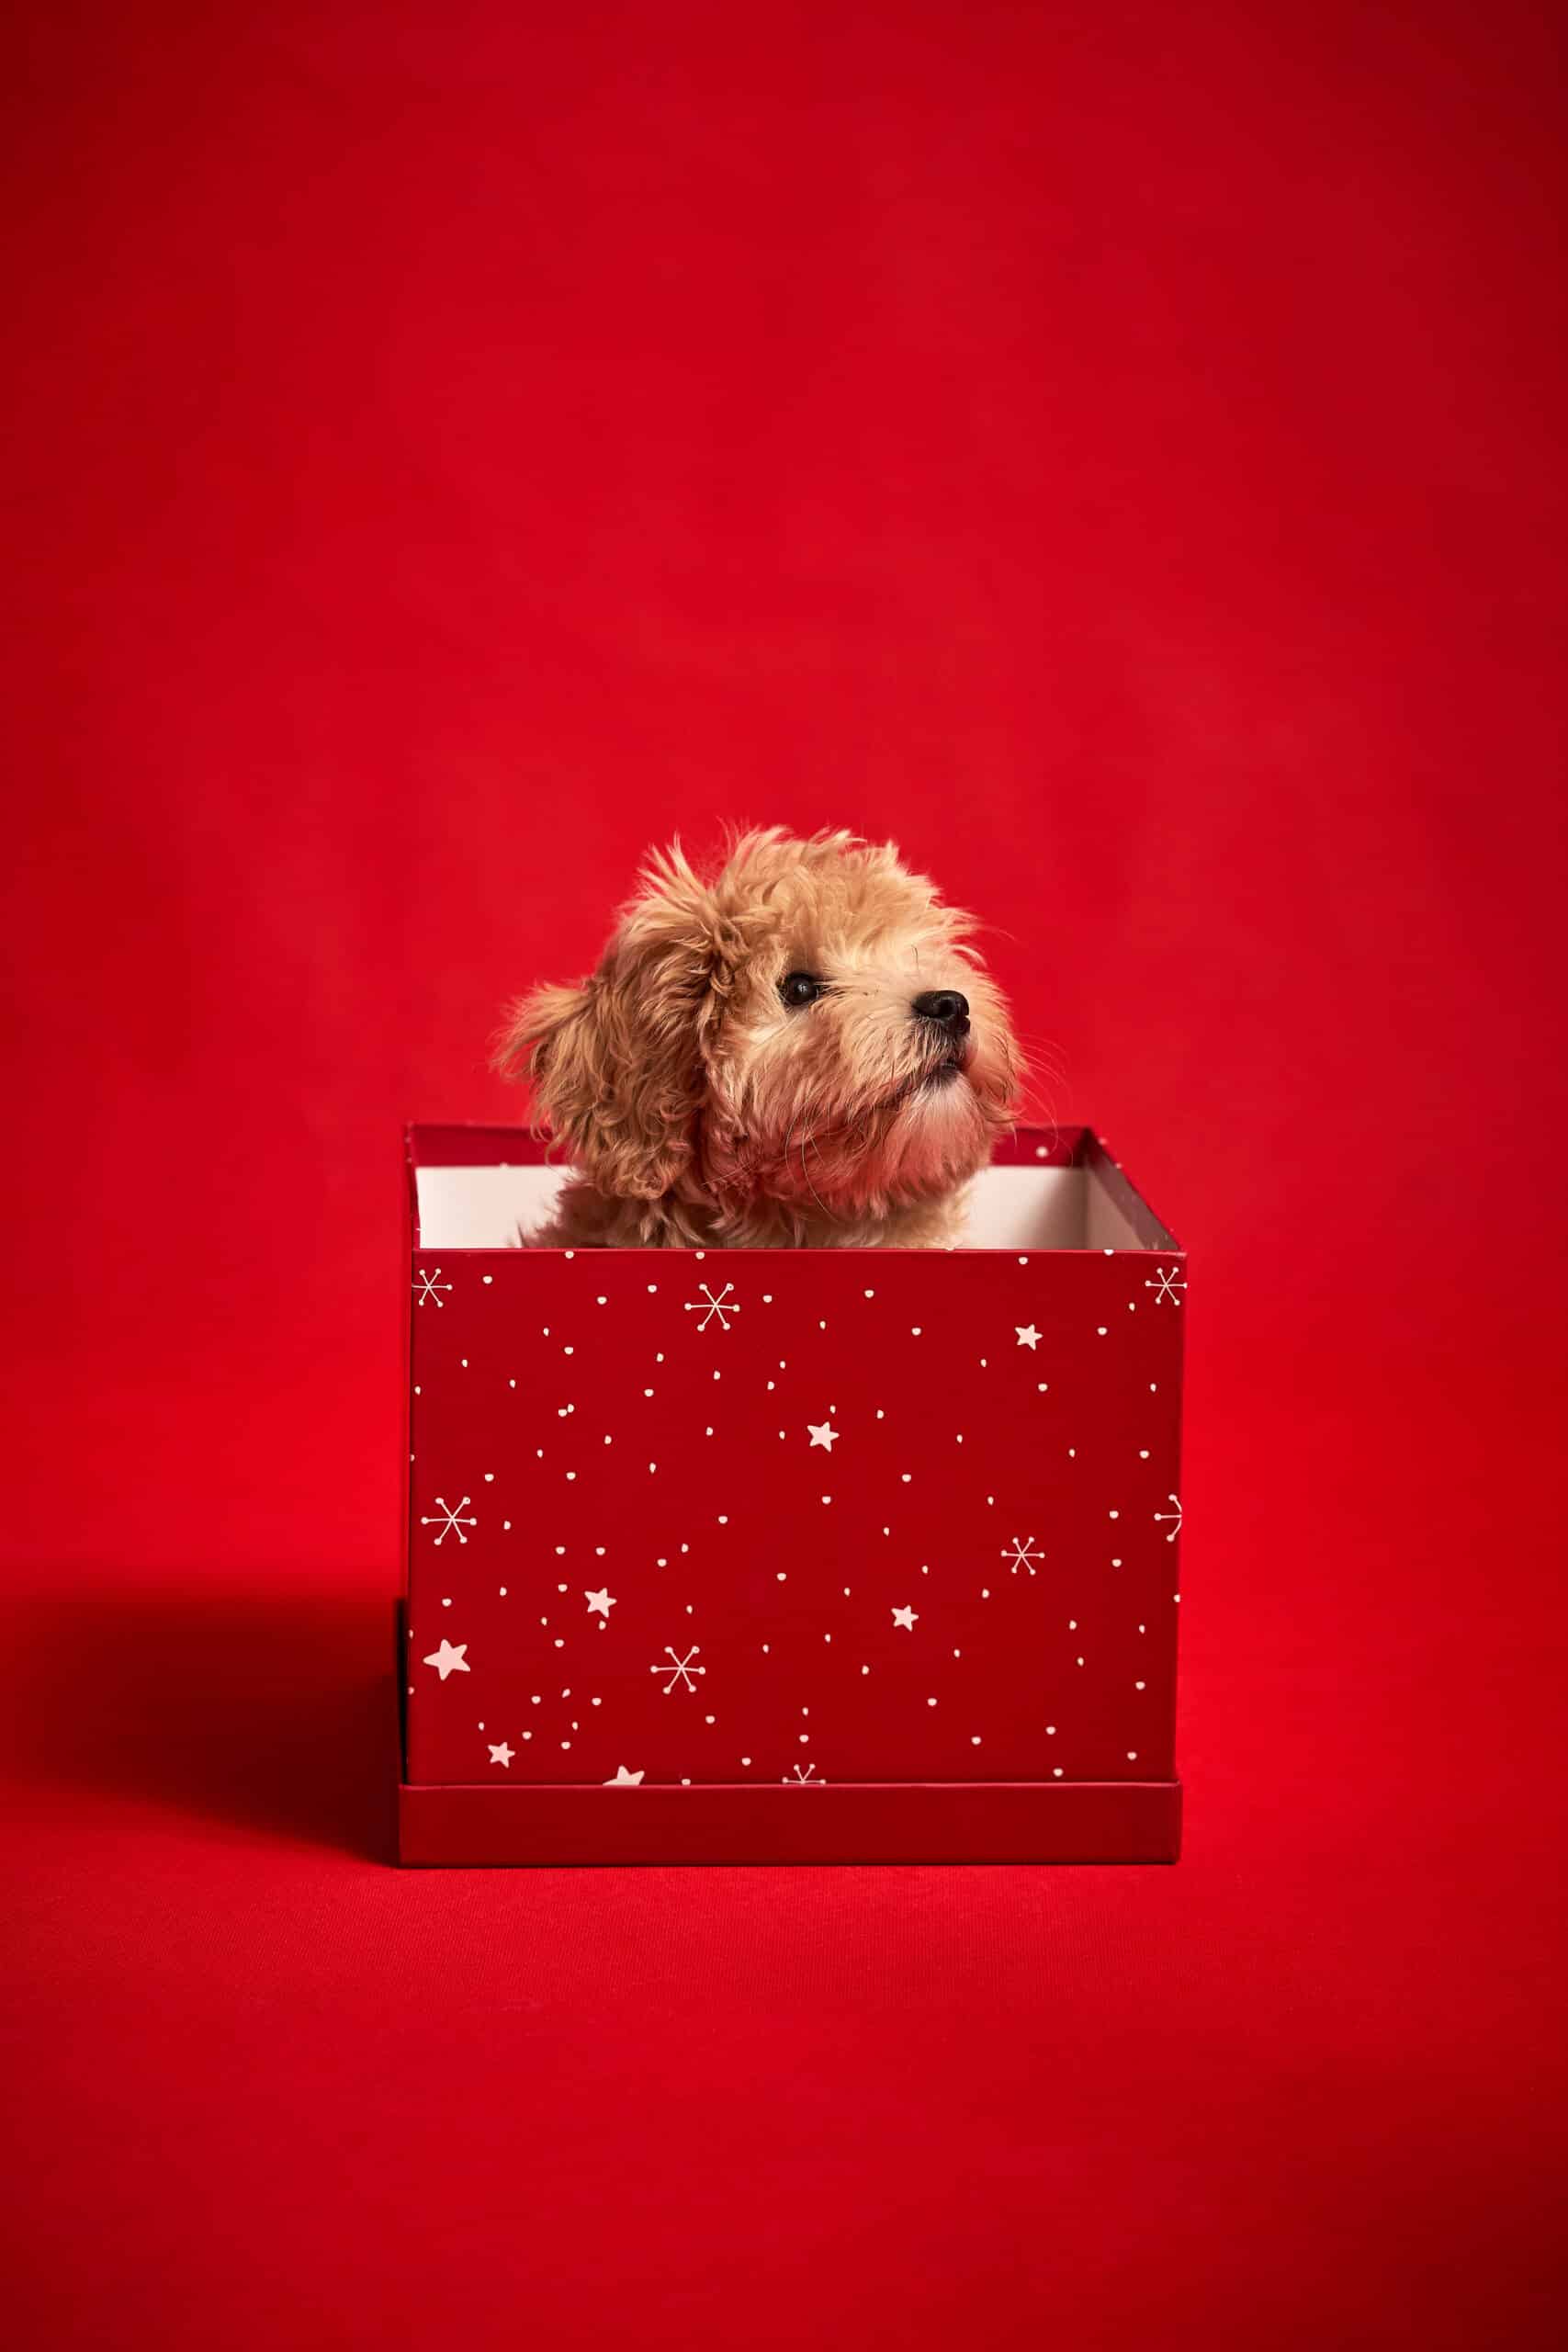 little cute puppy sits in a gift box on red background